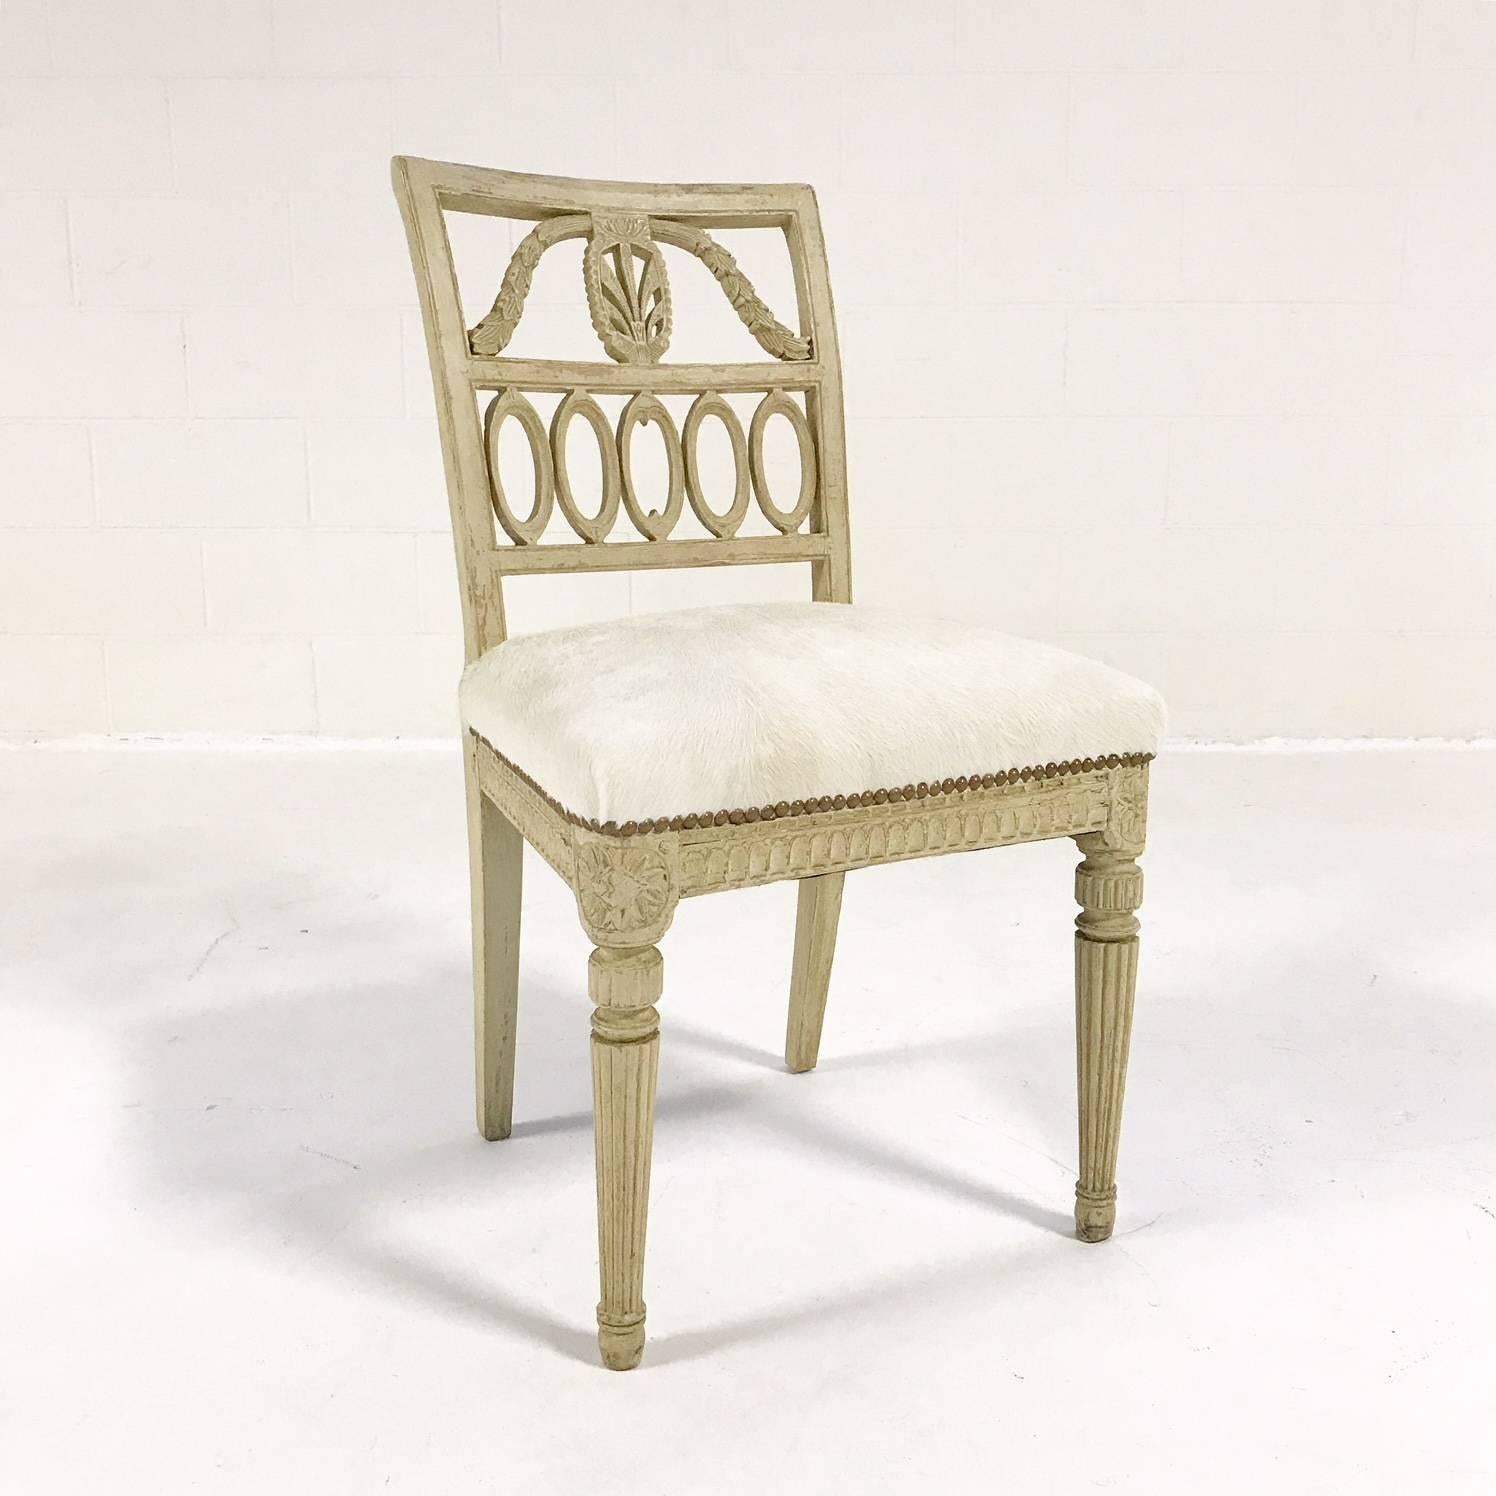 Breathtaking. These Swedish painted side chairs are just breathtaking. Chairs that are almost 300 years old and they still look beautiful today and tomorrow and everlasting. We chose the most buttery soft ivory Brazilian cowhide we could find for